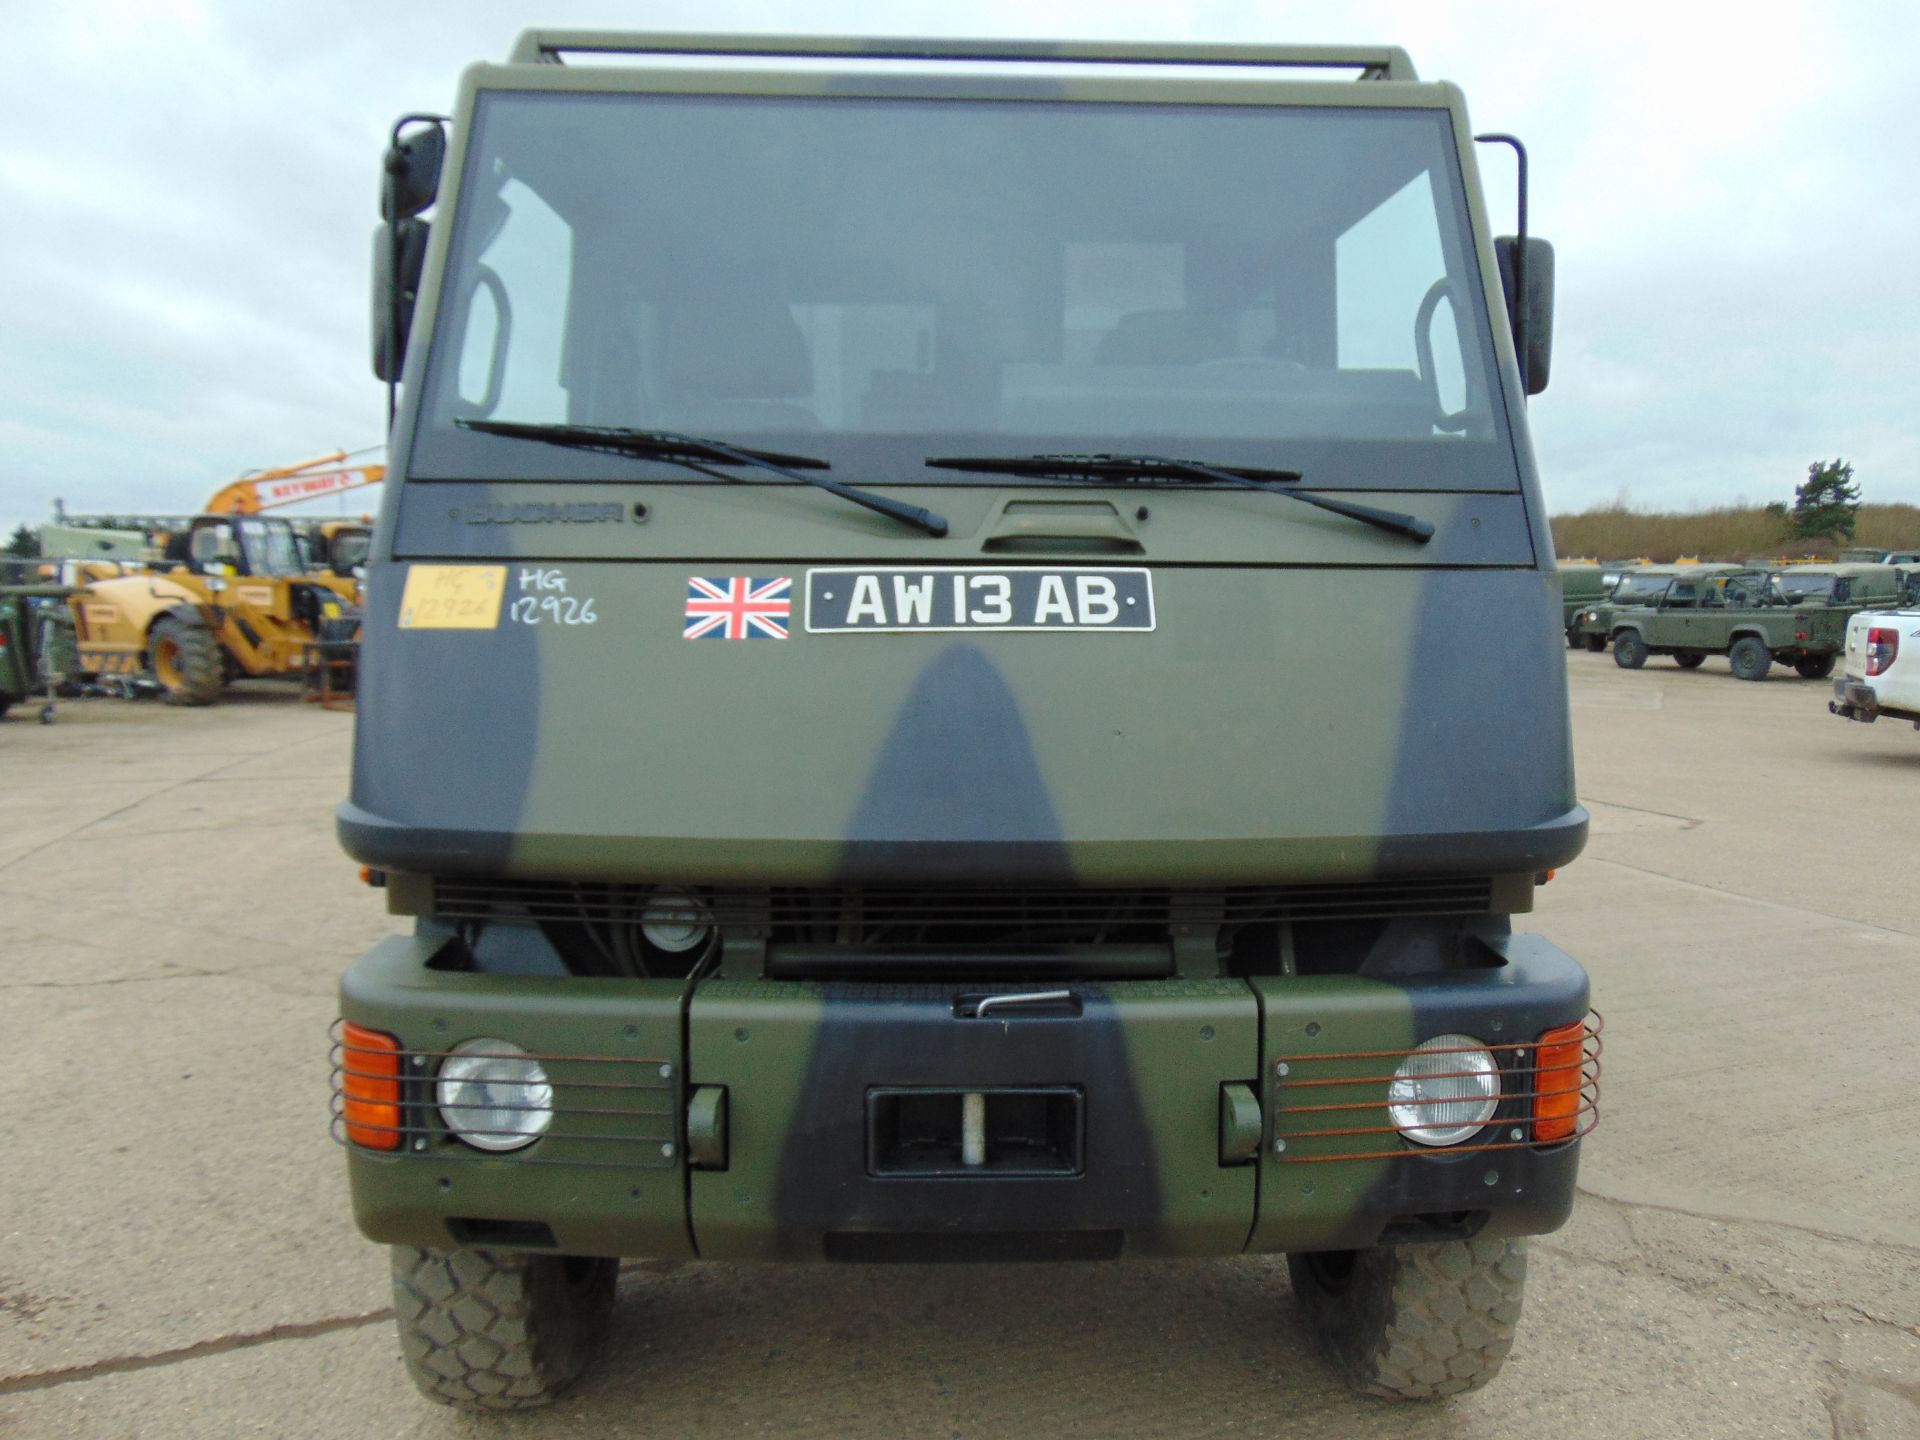 Ex Reserve Left Hand Drive Mowag Bucher Duro II 6x6 High-Mobility Tactical Vehicle - Image 2 of 15